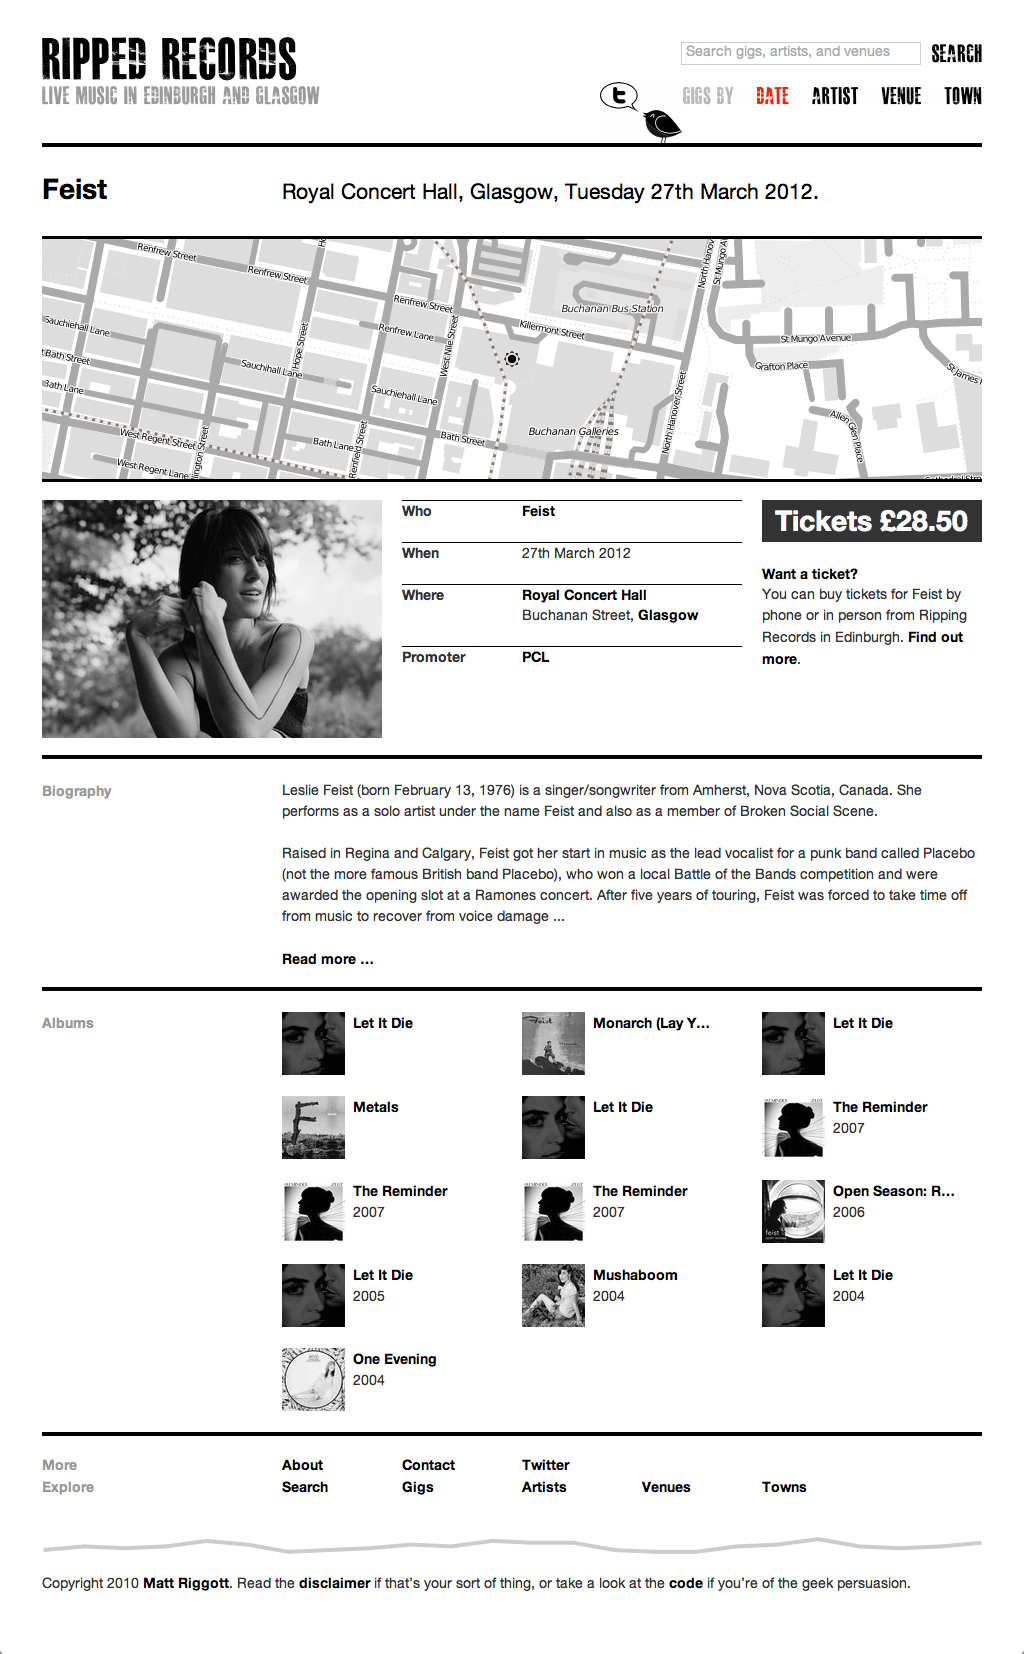 Full-size screenshot of a gig page for Feist